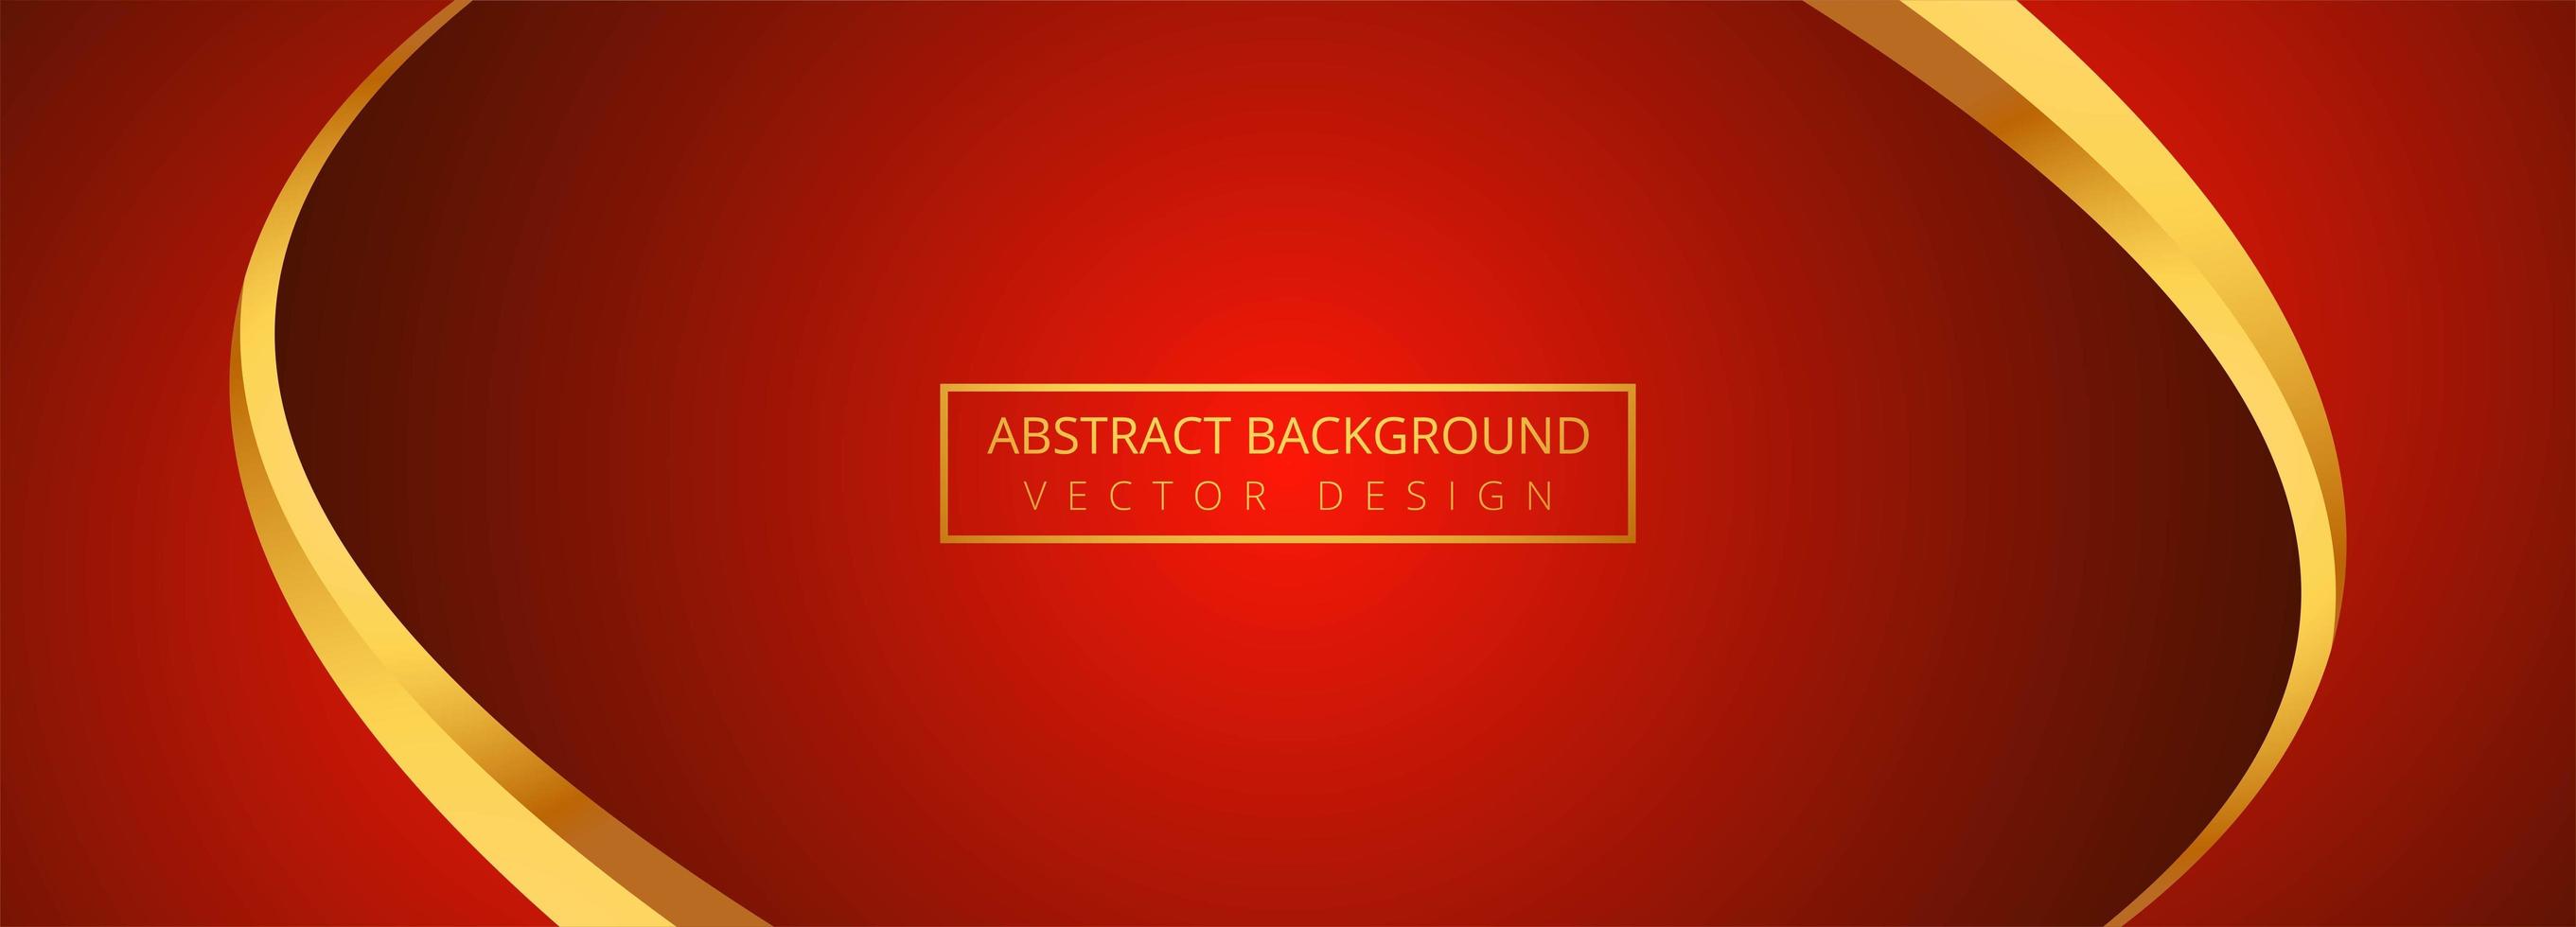 Abstract golden wave with red banner background vector